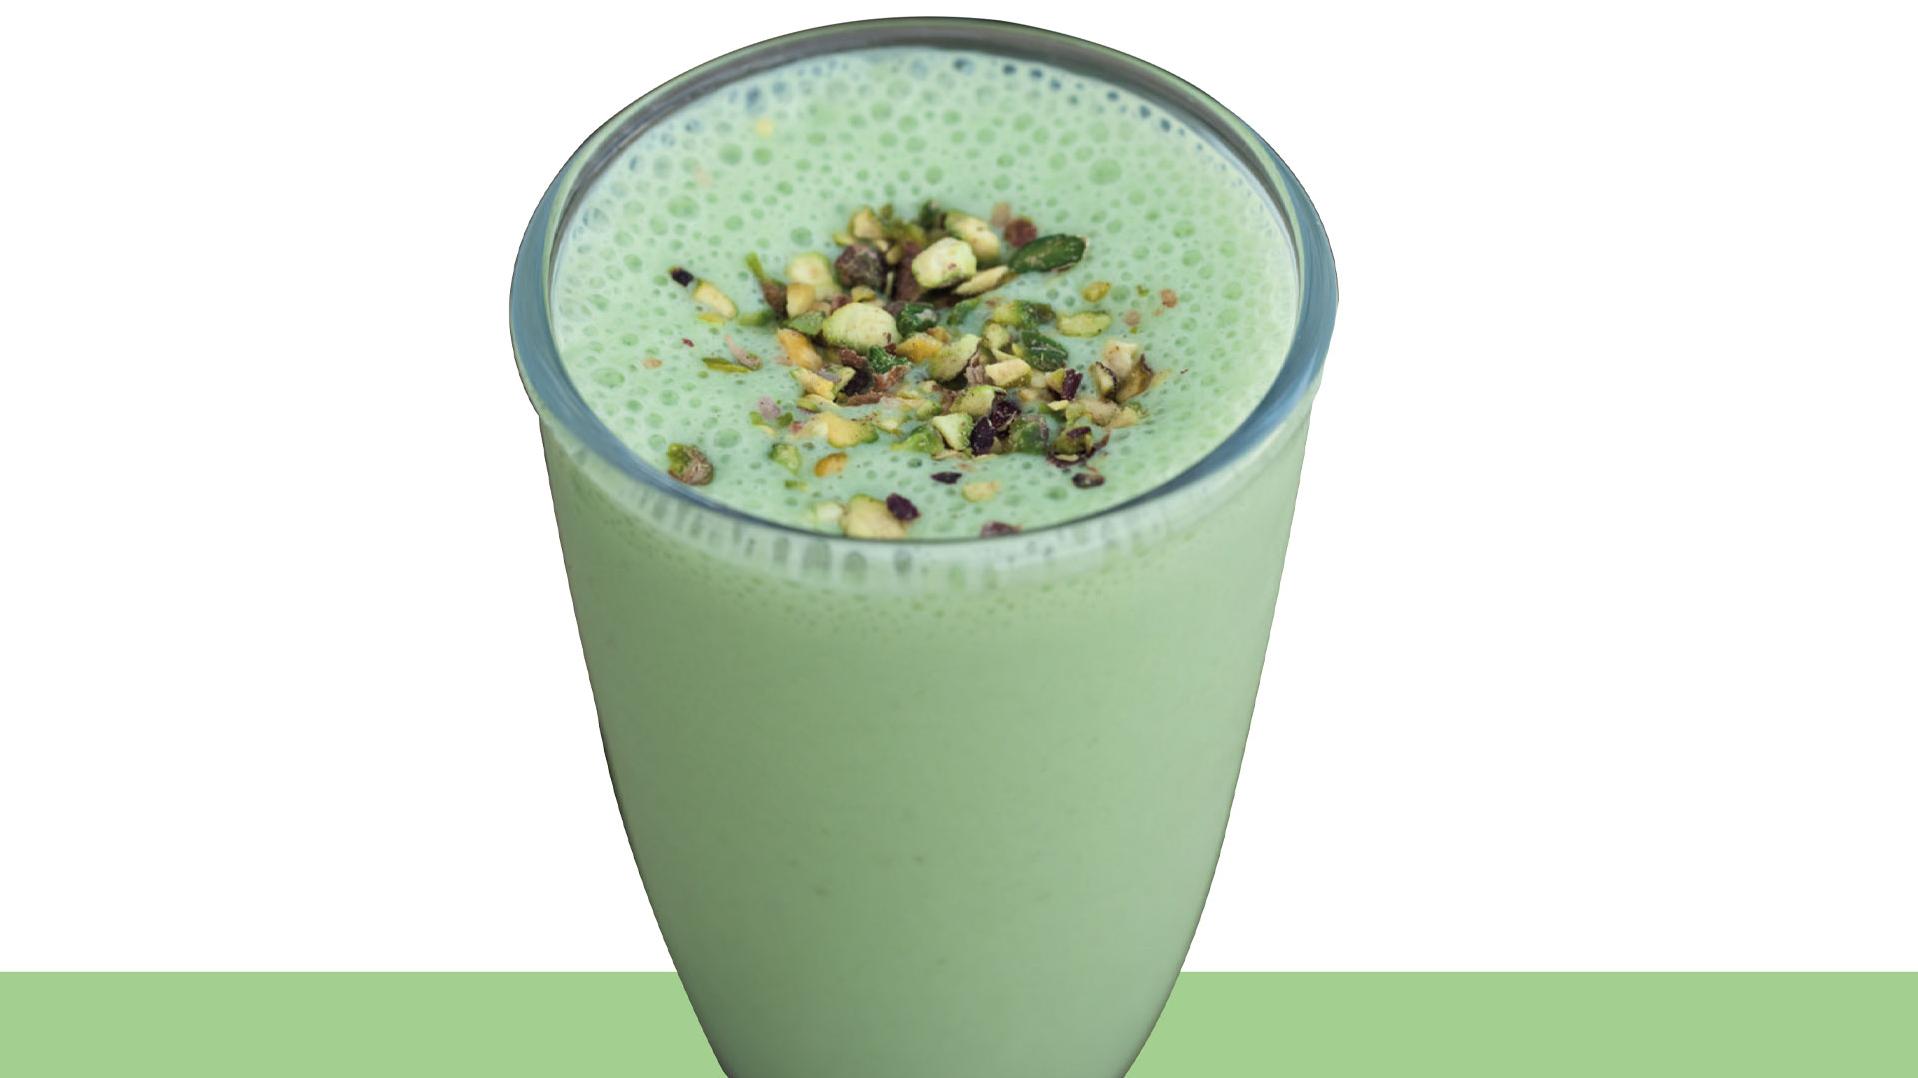  Satisfy your sweet tooth the healthy way with this creamy smoothie.